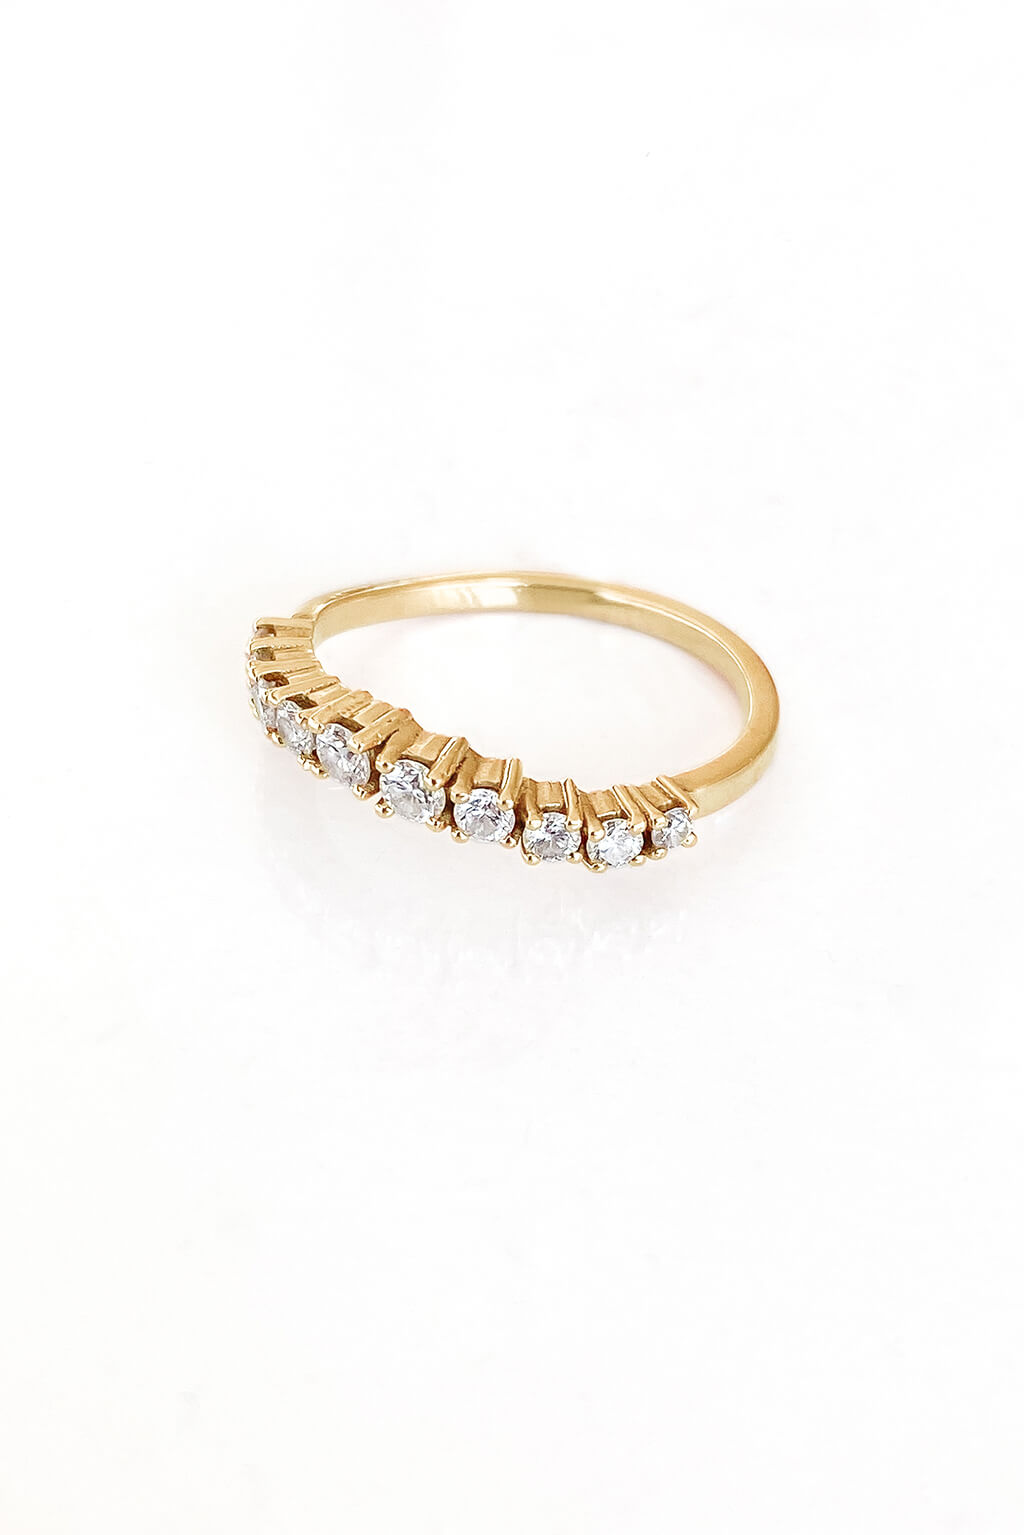 River gold ring